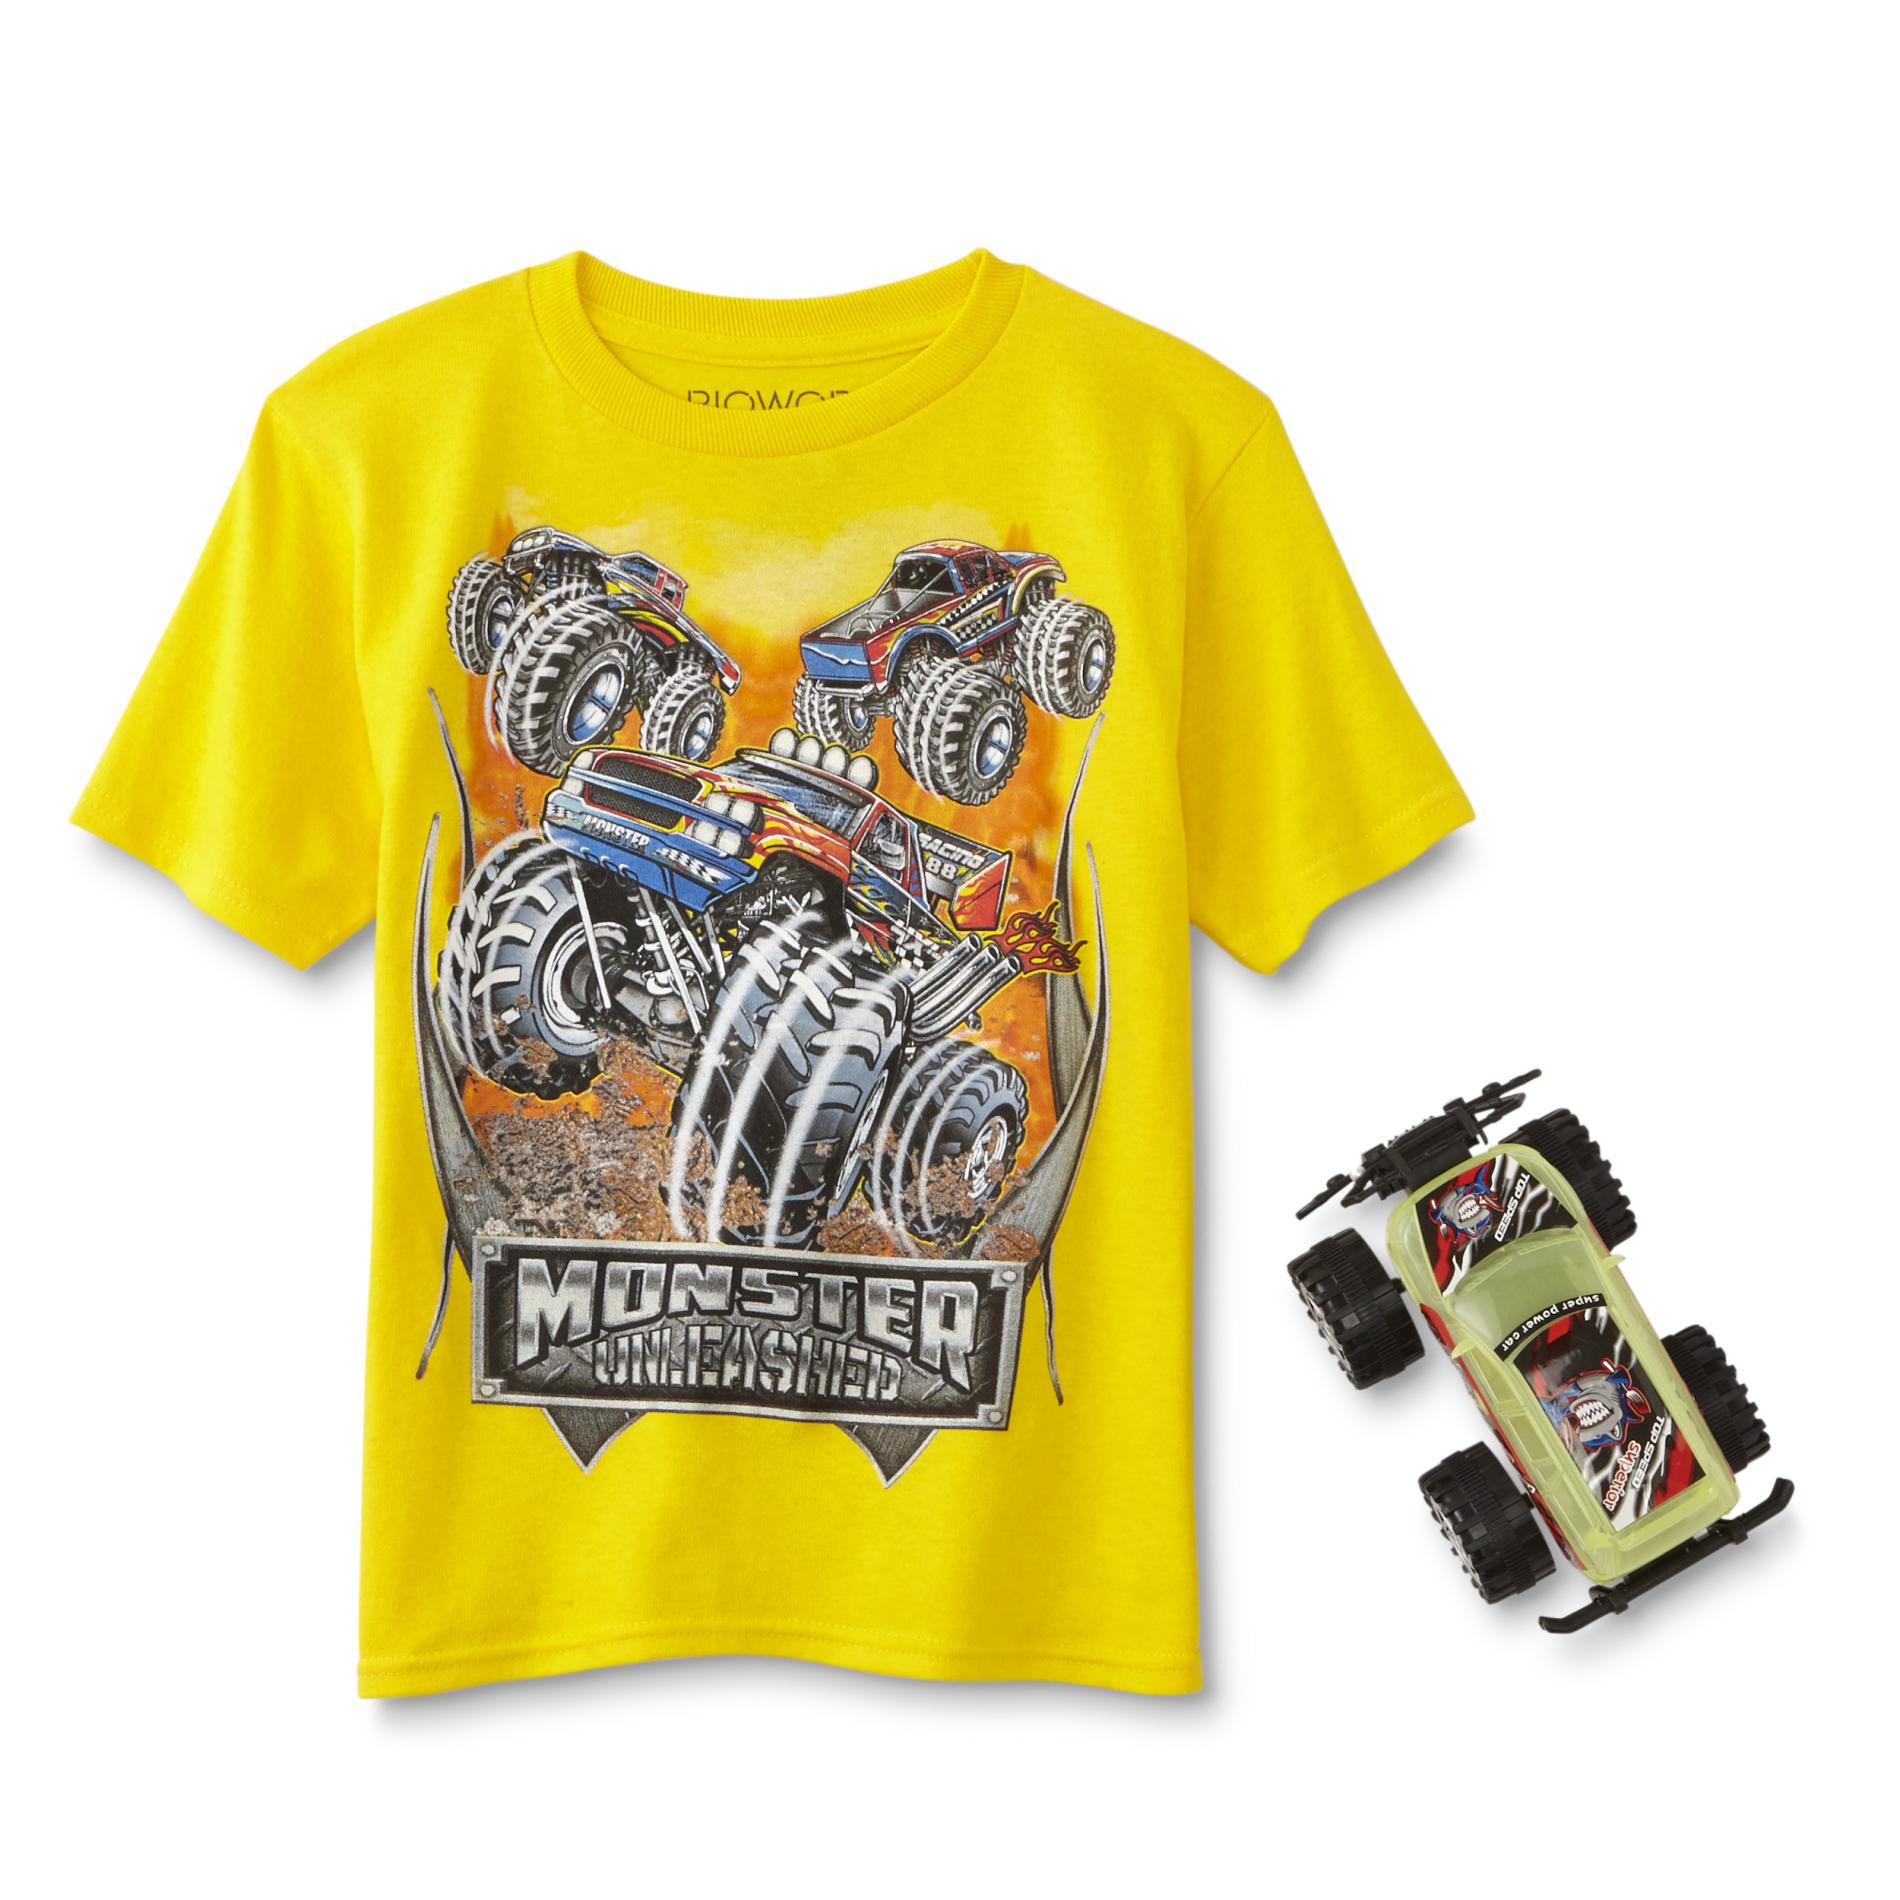 Boy's Graphic T-Shirt & Toy - Monster Truck